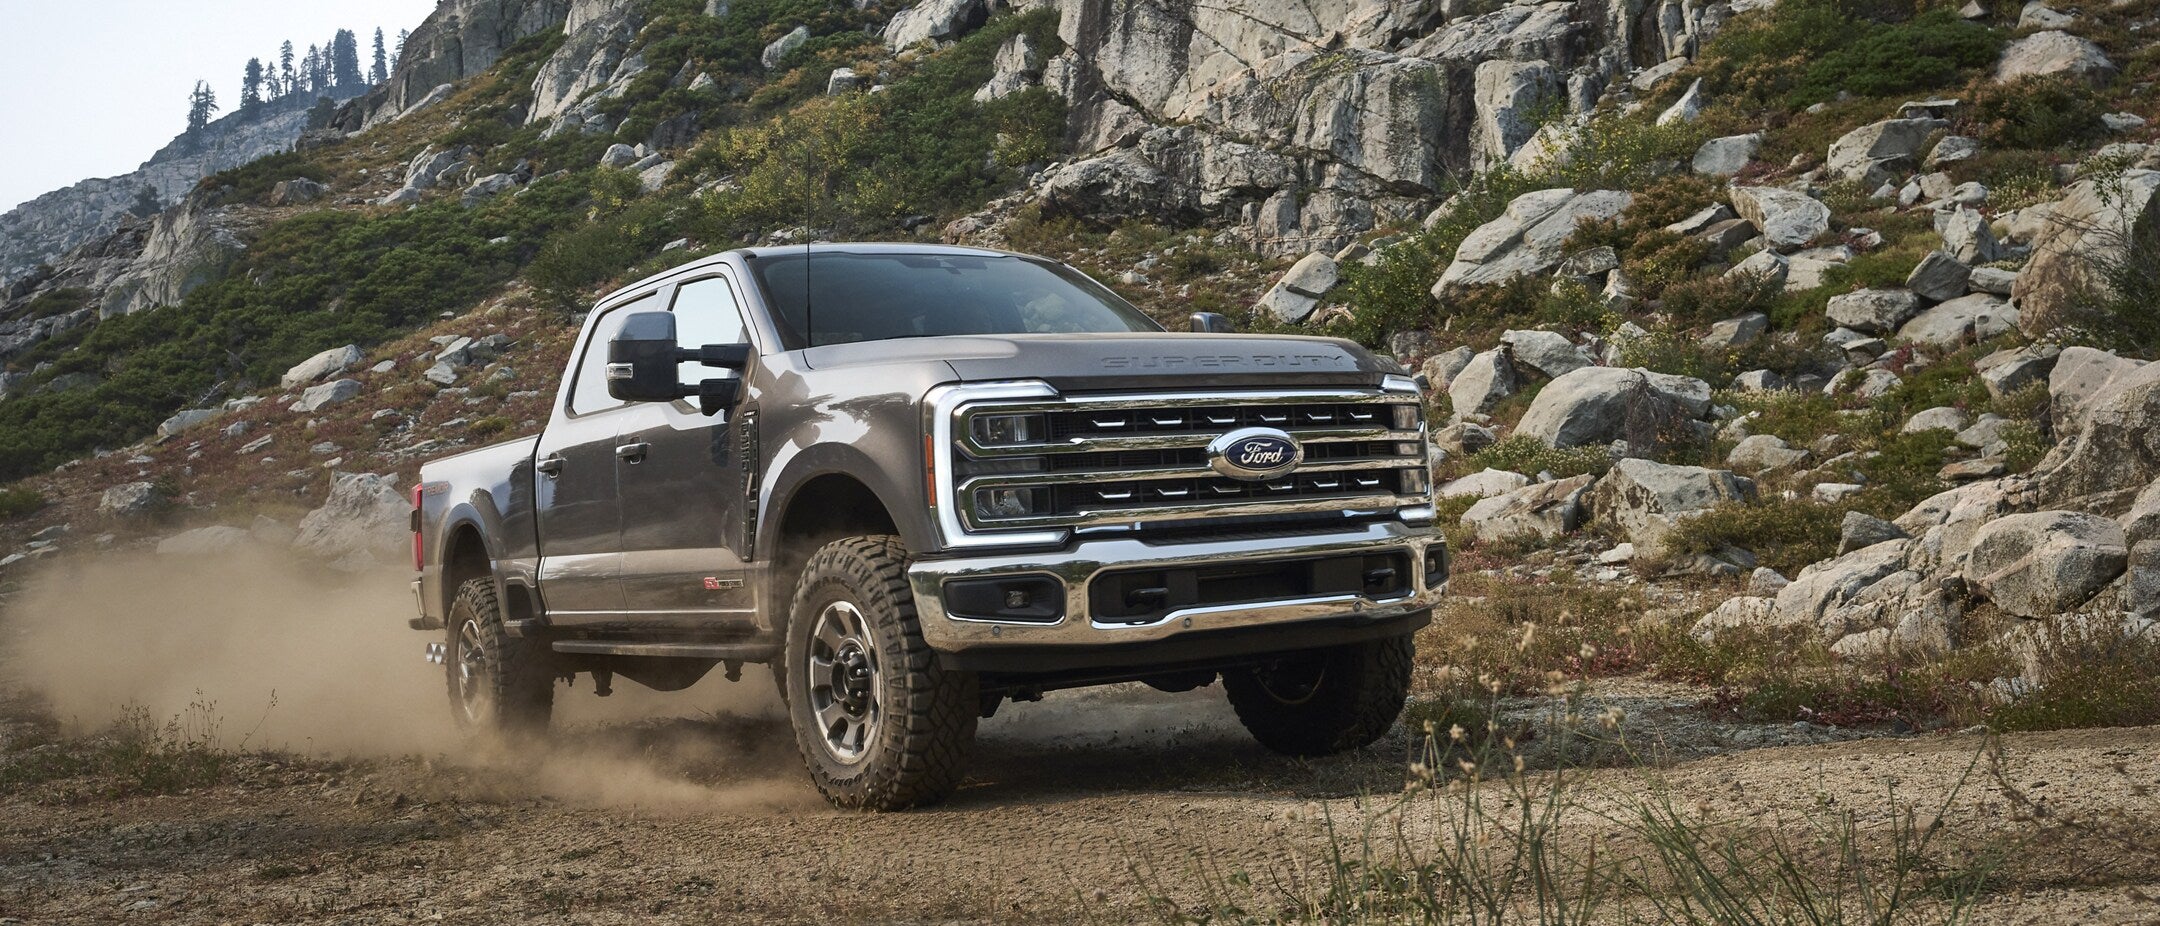 The all-new 2023 Ford Super Duty at Power Ford in Albuquerque, New Mexico